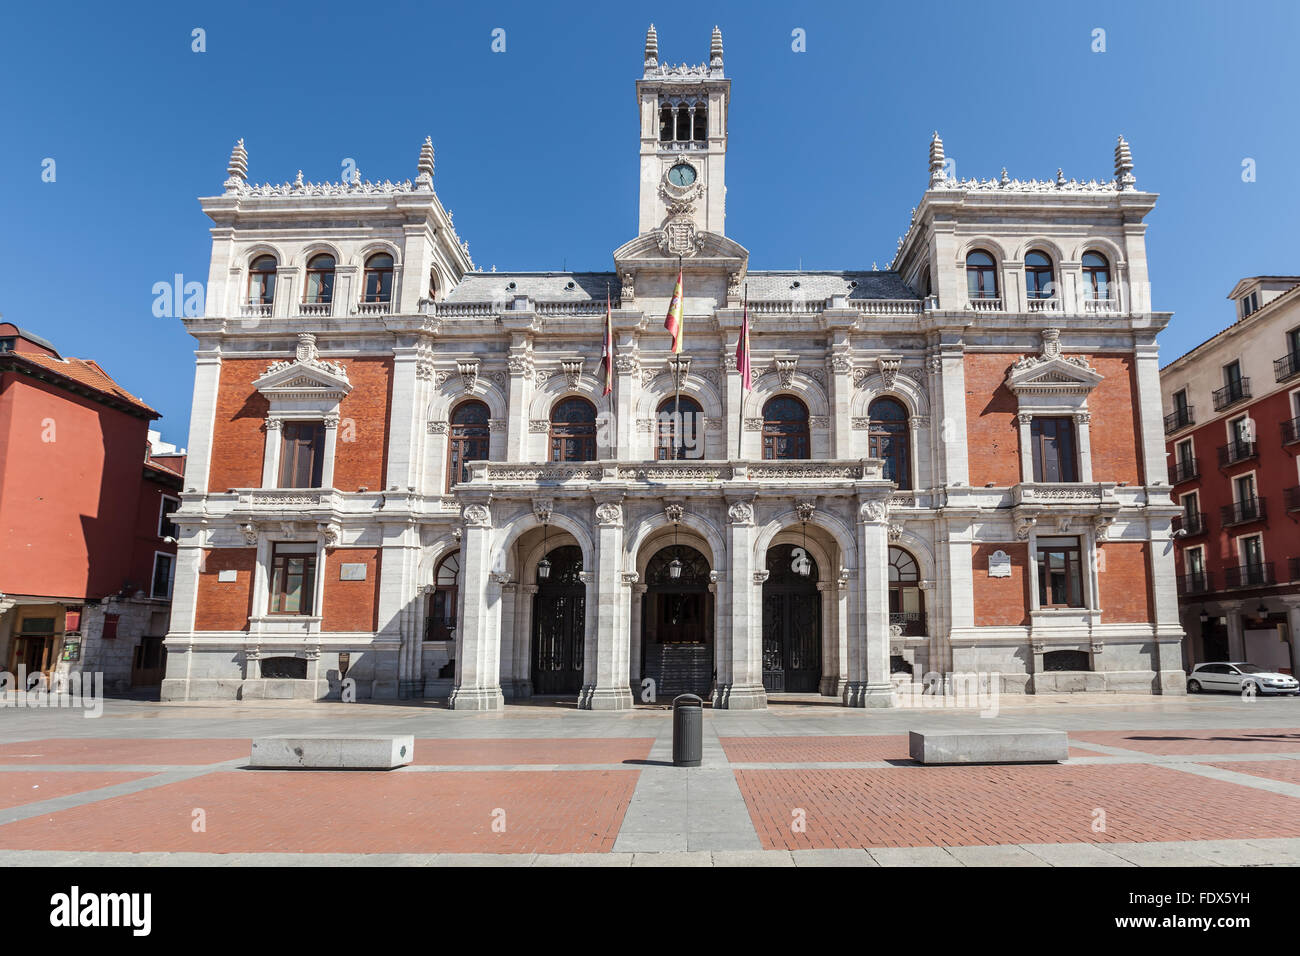 City hall on plaza mayor square in Valladolid, Castile and Leon, Spain Stock Photo